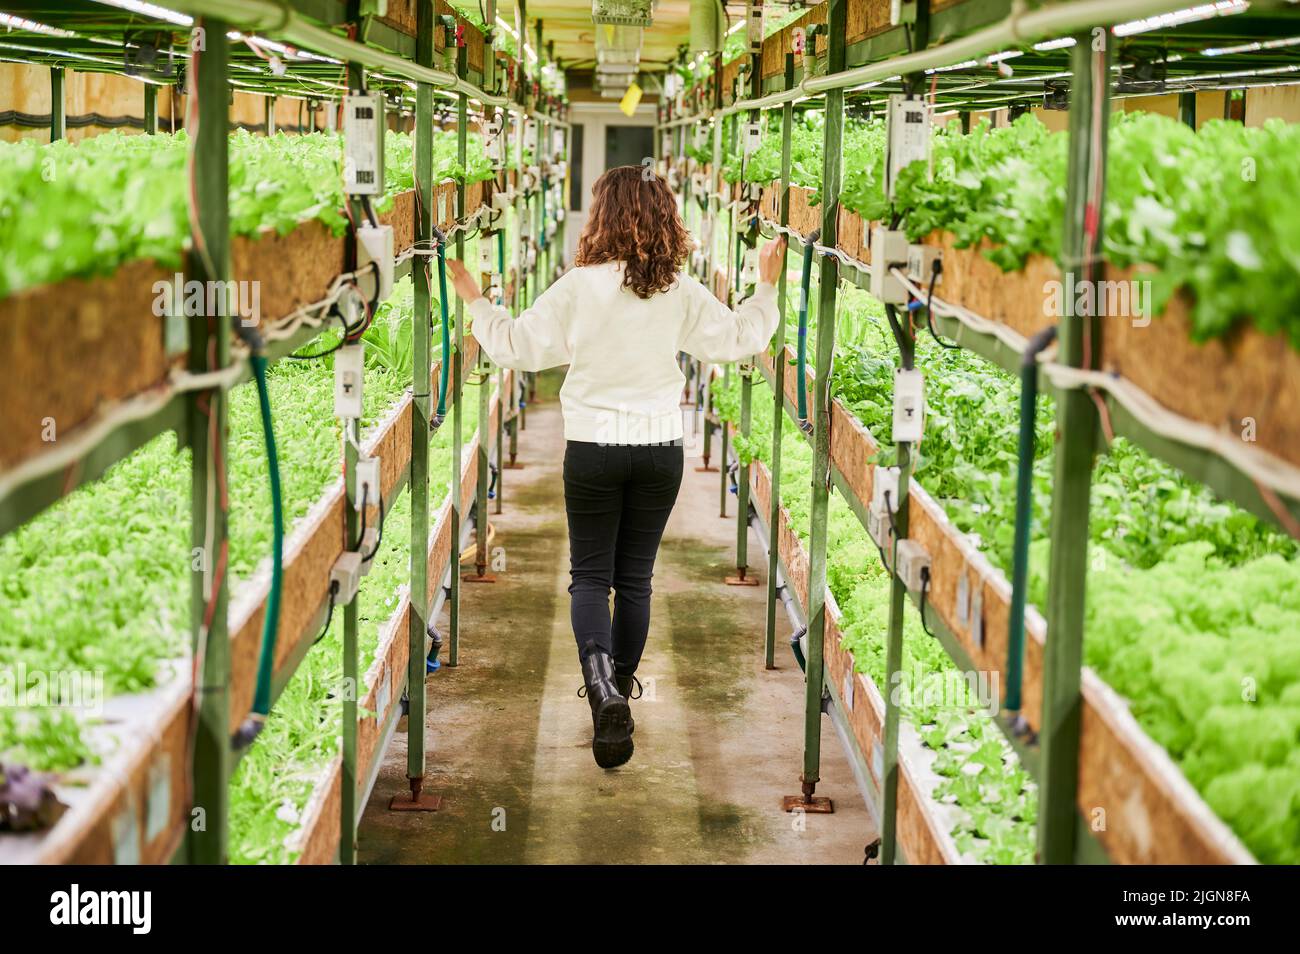 Back view of female person walking down aisle between shelves with leafy greens. Young woman strolling down agricultural greenhouse and looking at green leafy plants. Stock Photo